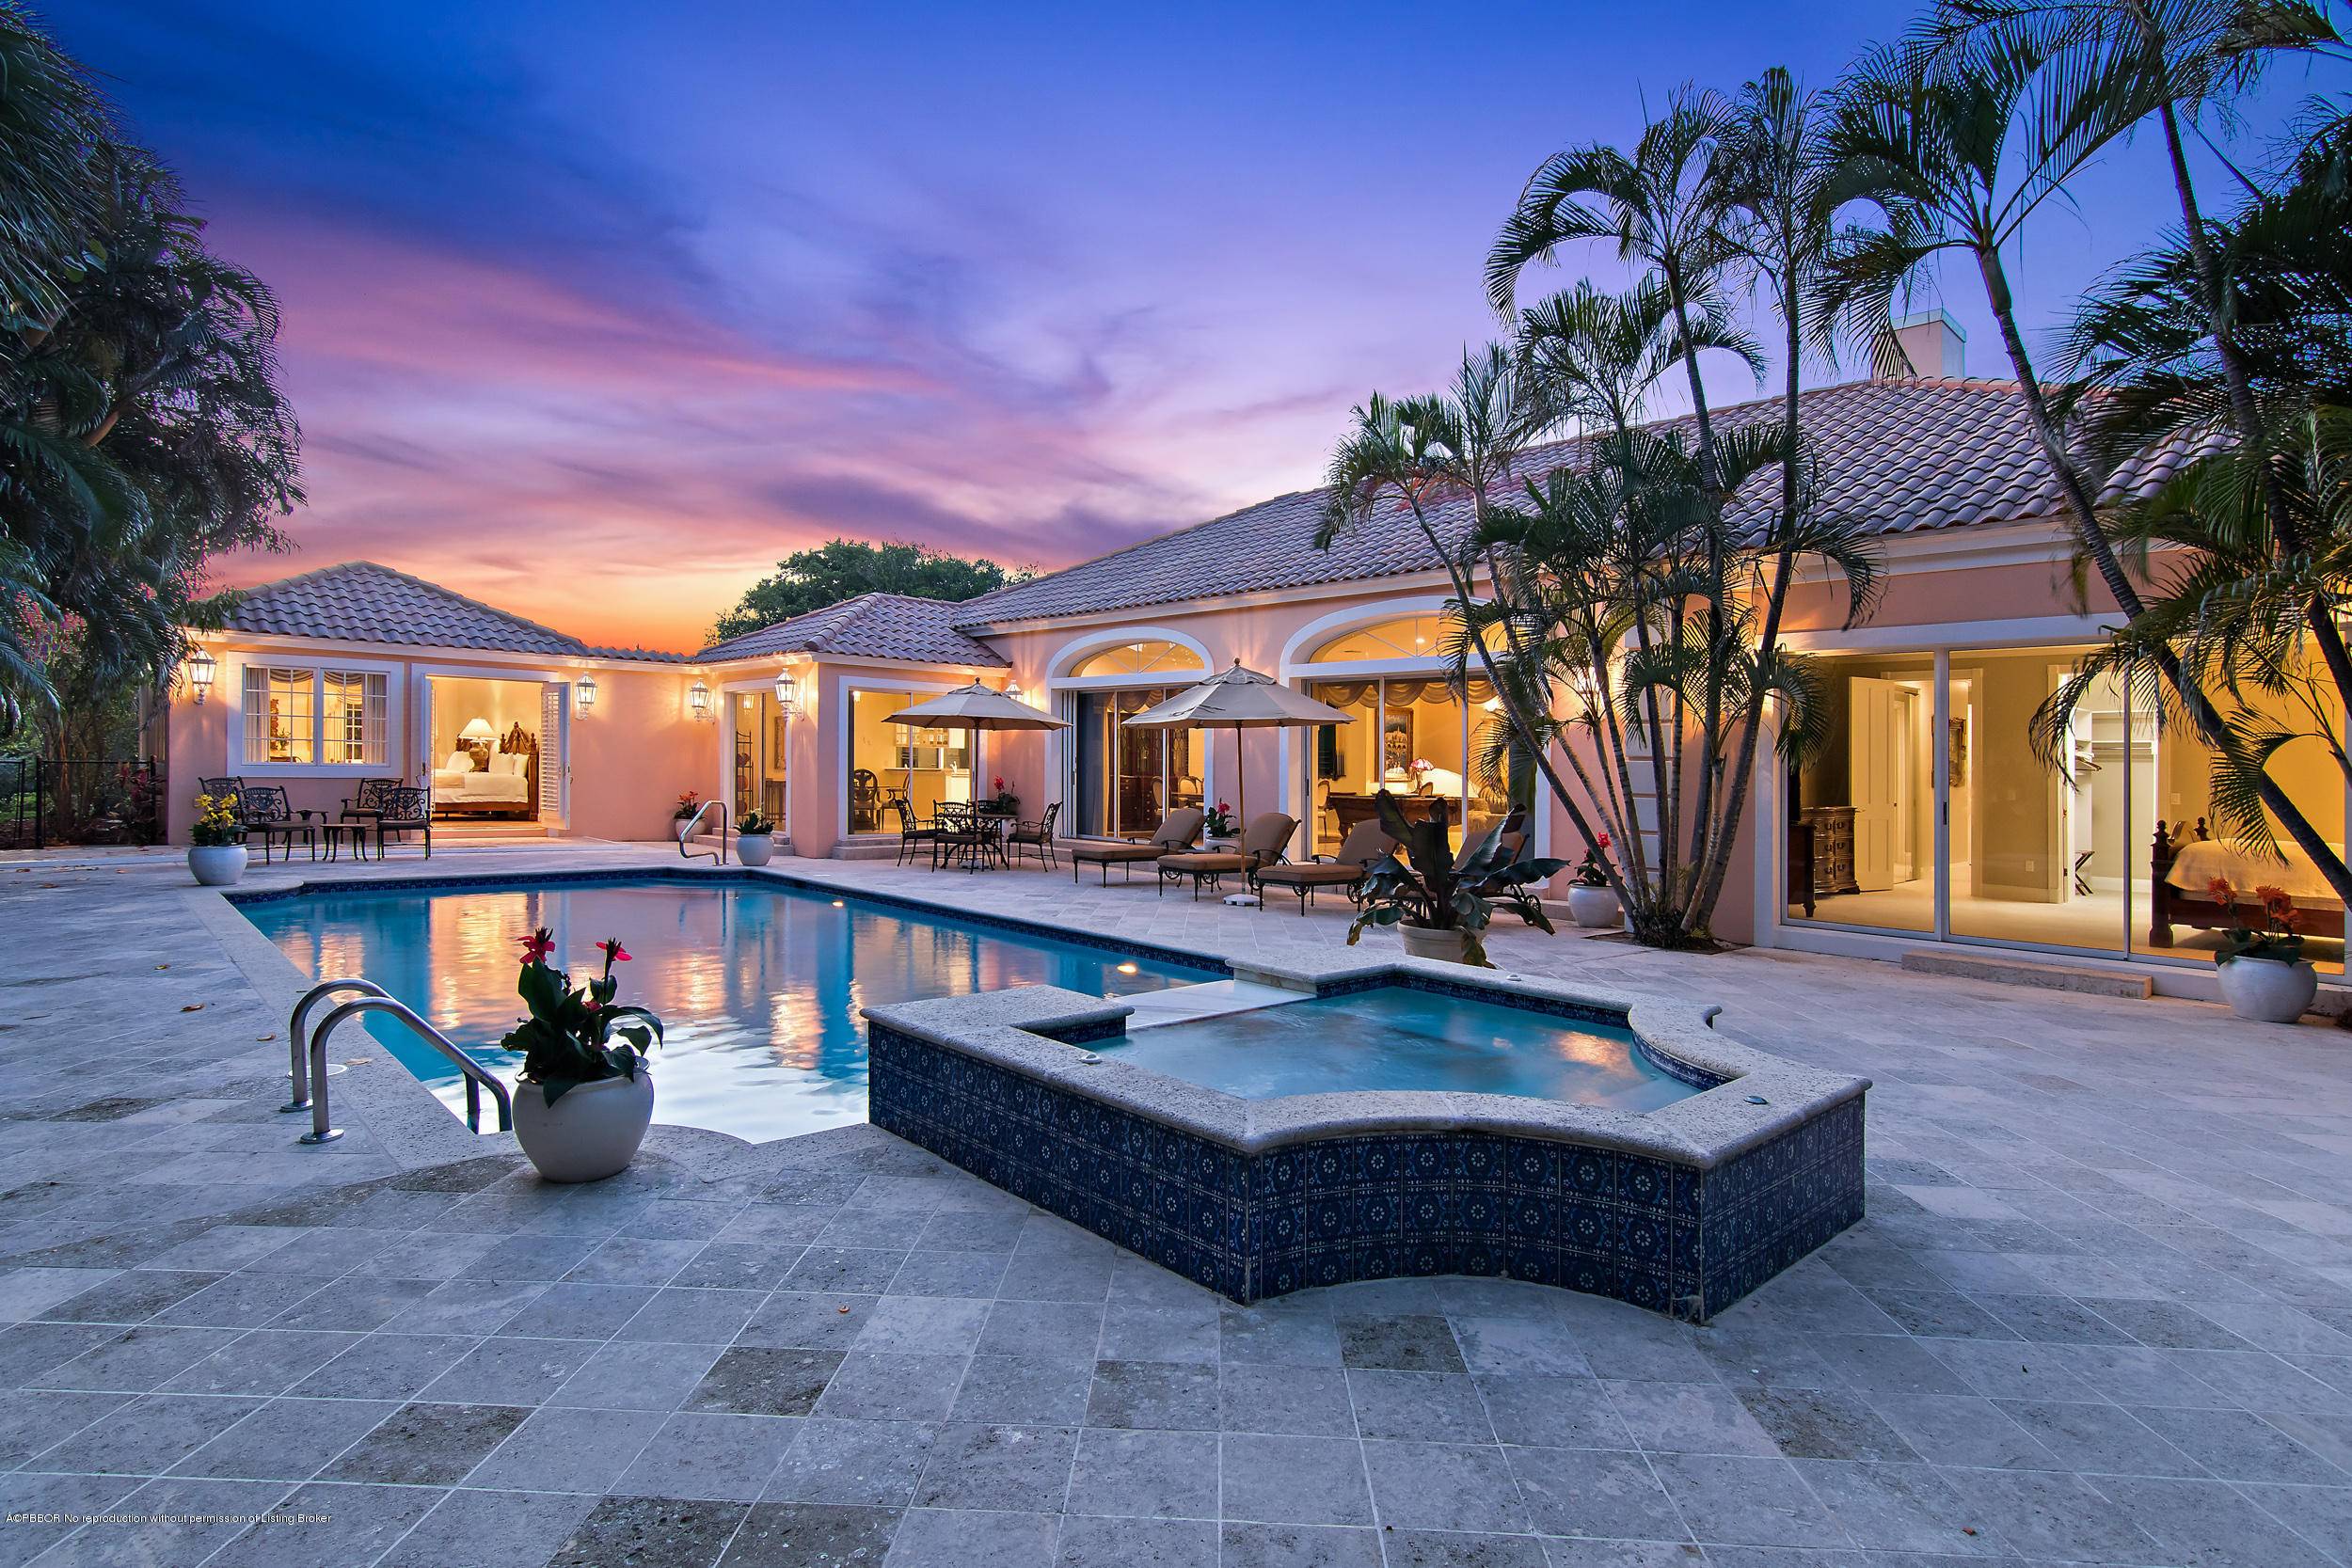 Stunning Palm Beach home located adjacent to the exclusive Mar a Lago Club.